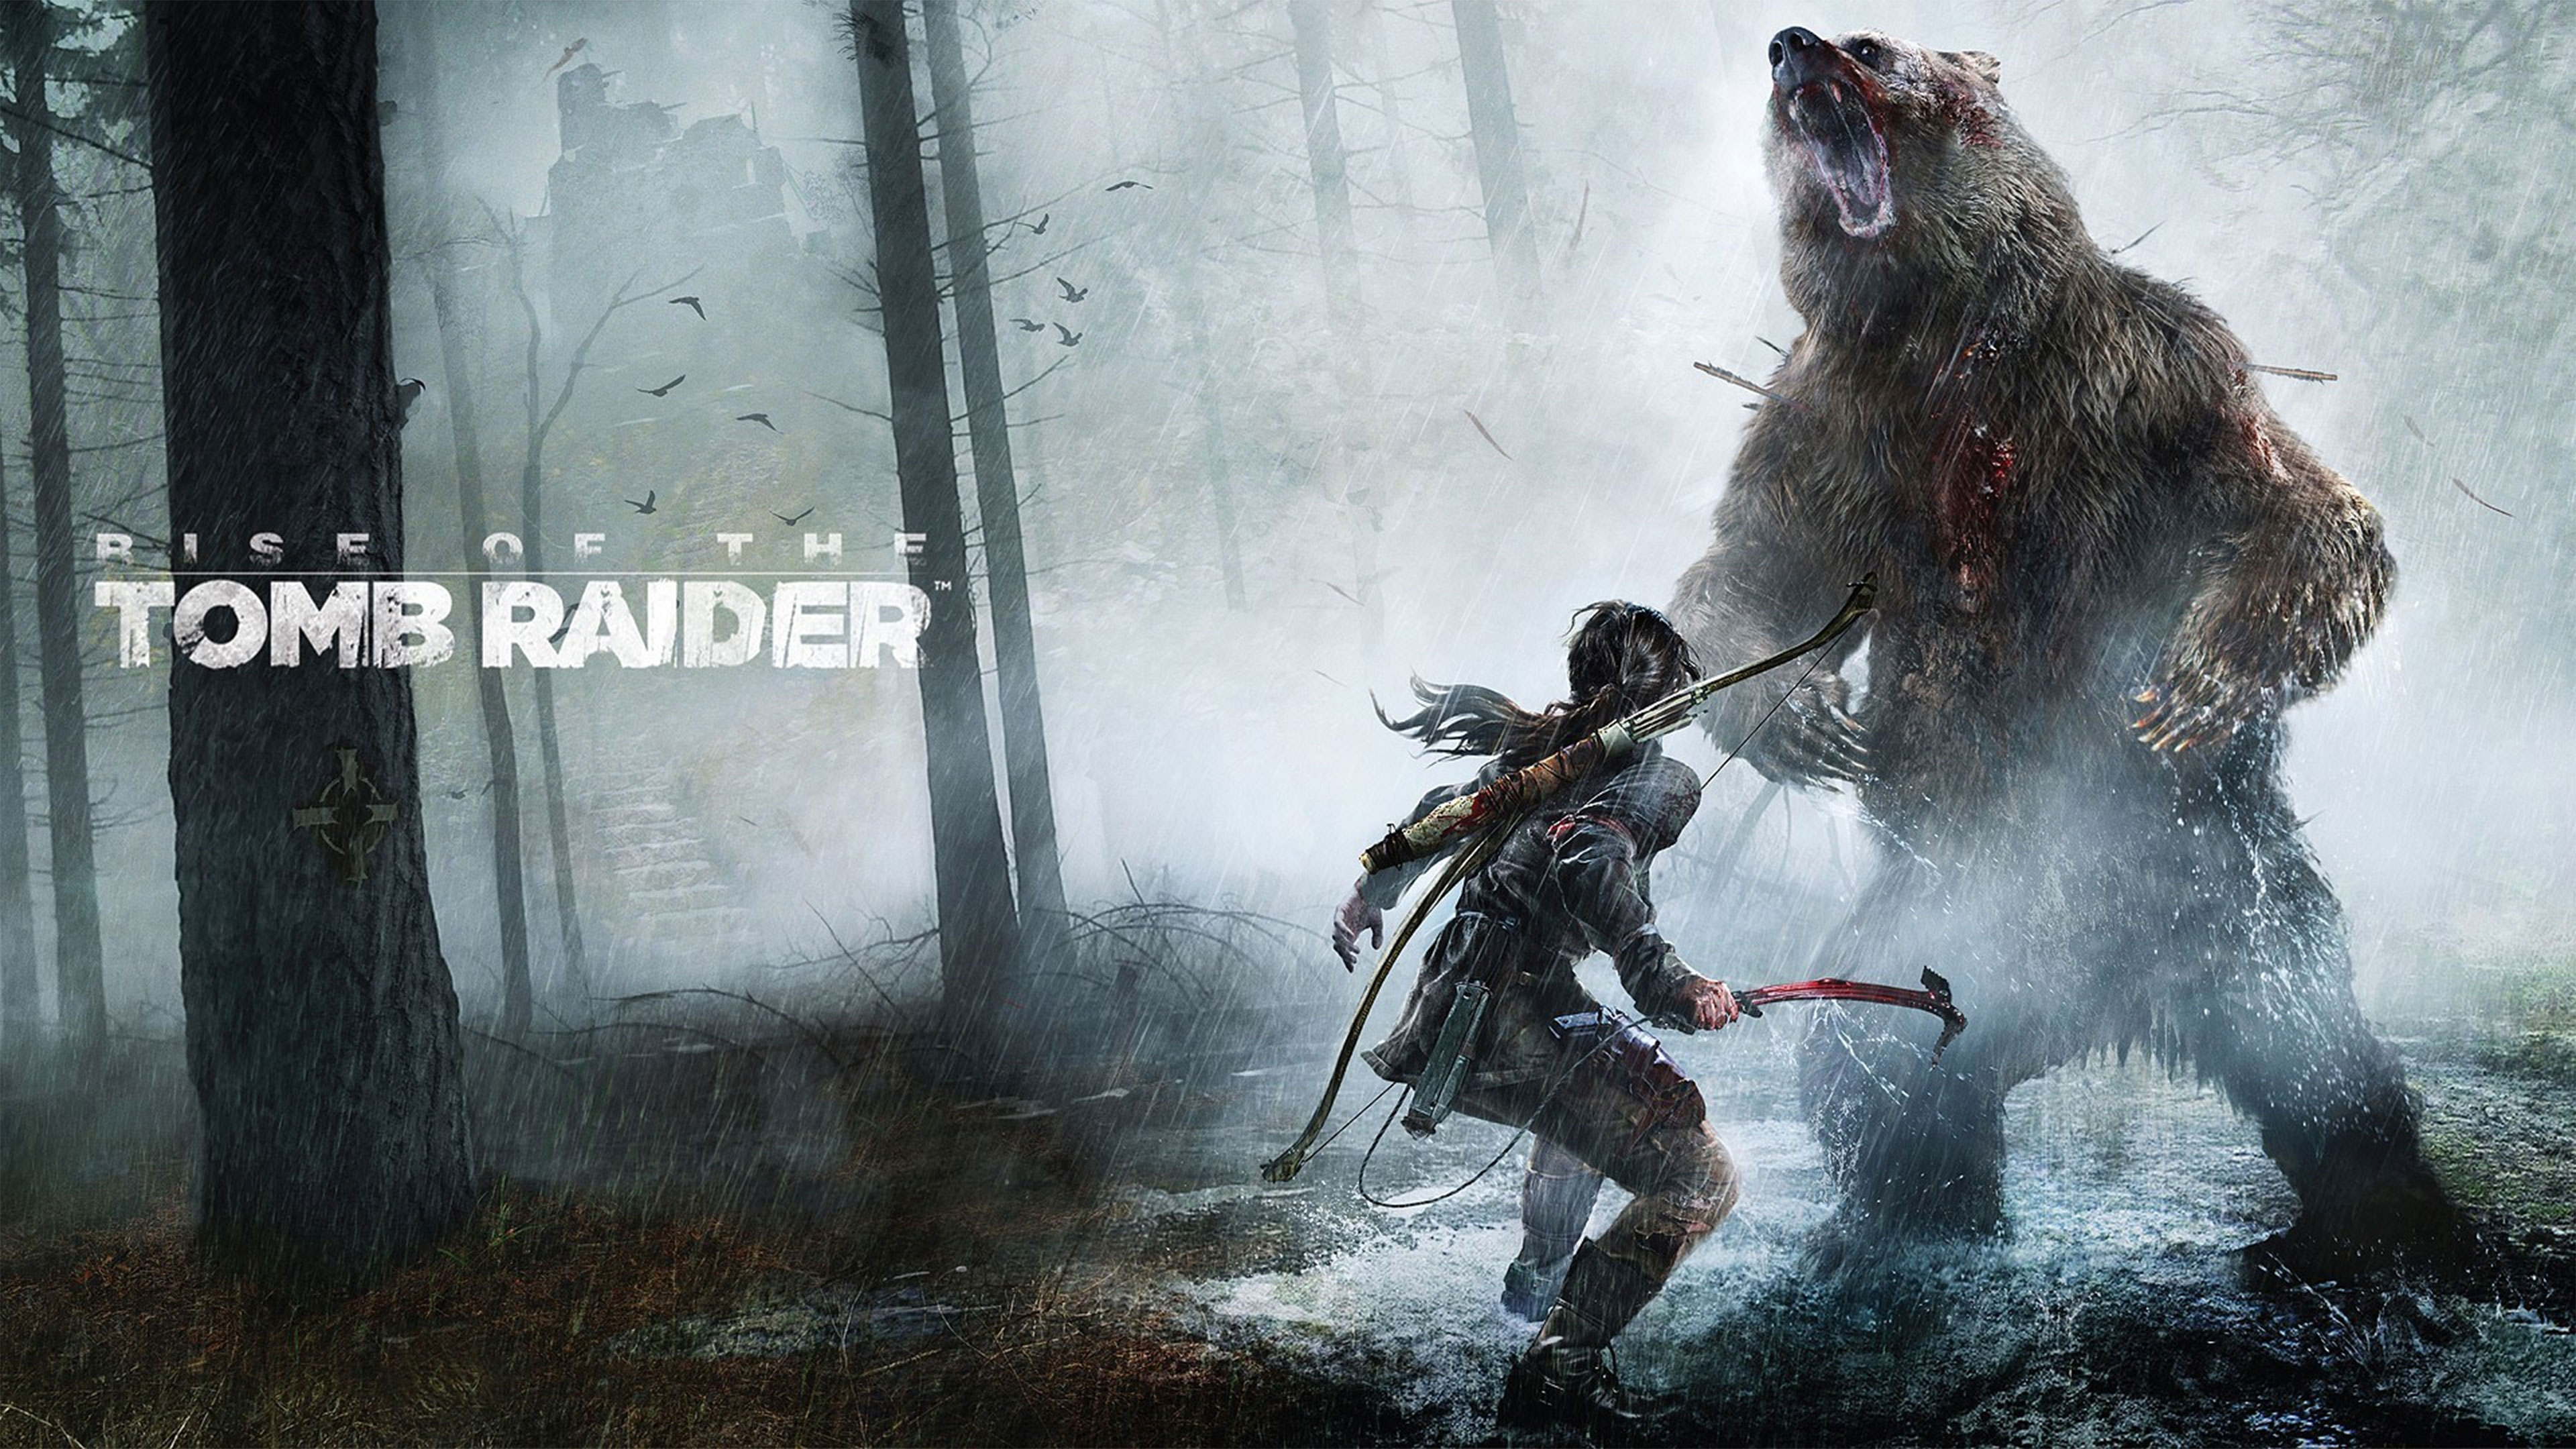 Rise Of The Tomb Raider Wallpapers In Ultra Hd 4k Gameranx Images, Photos, Reviews